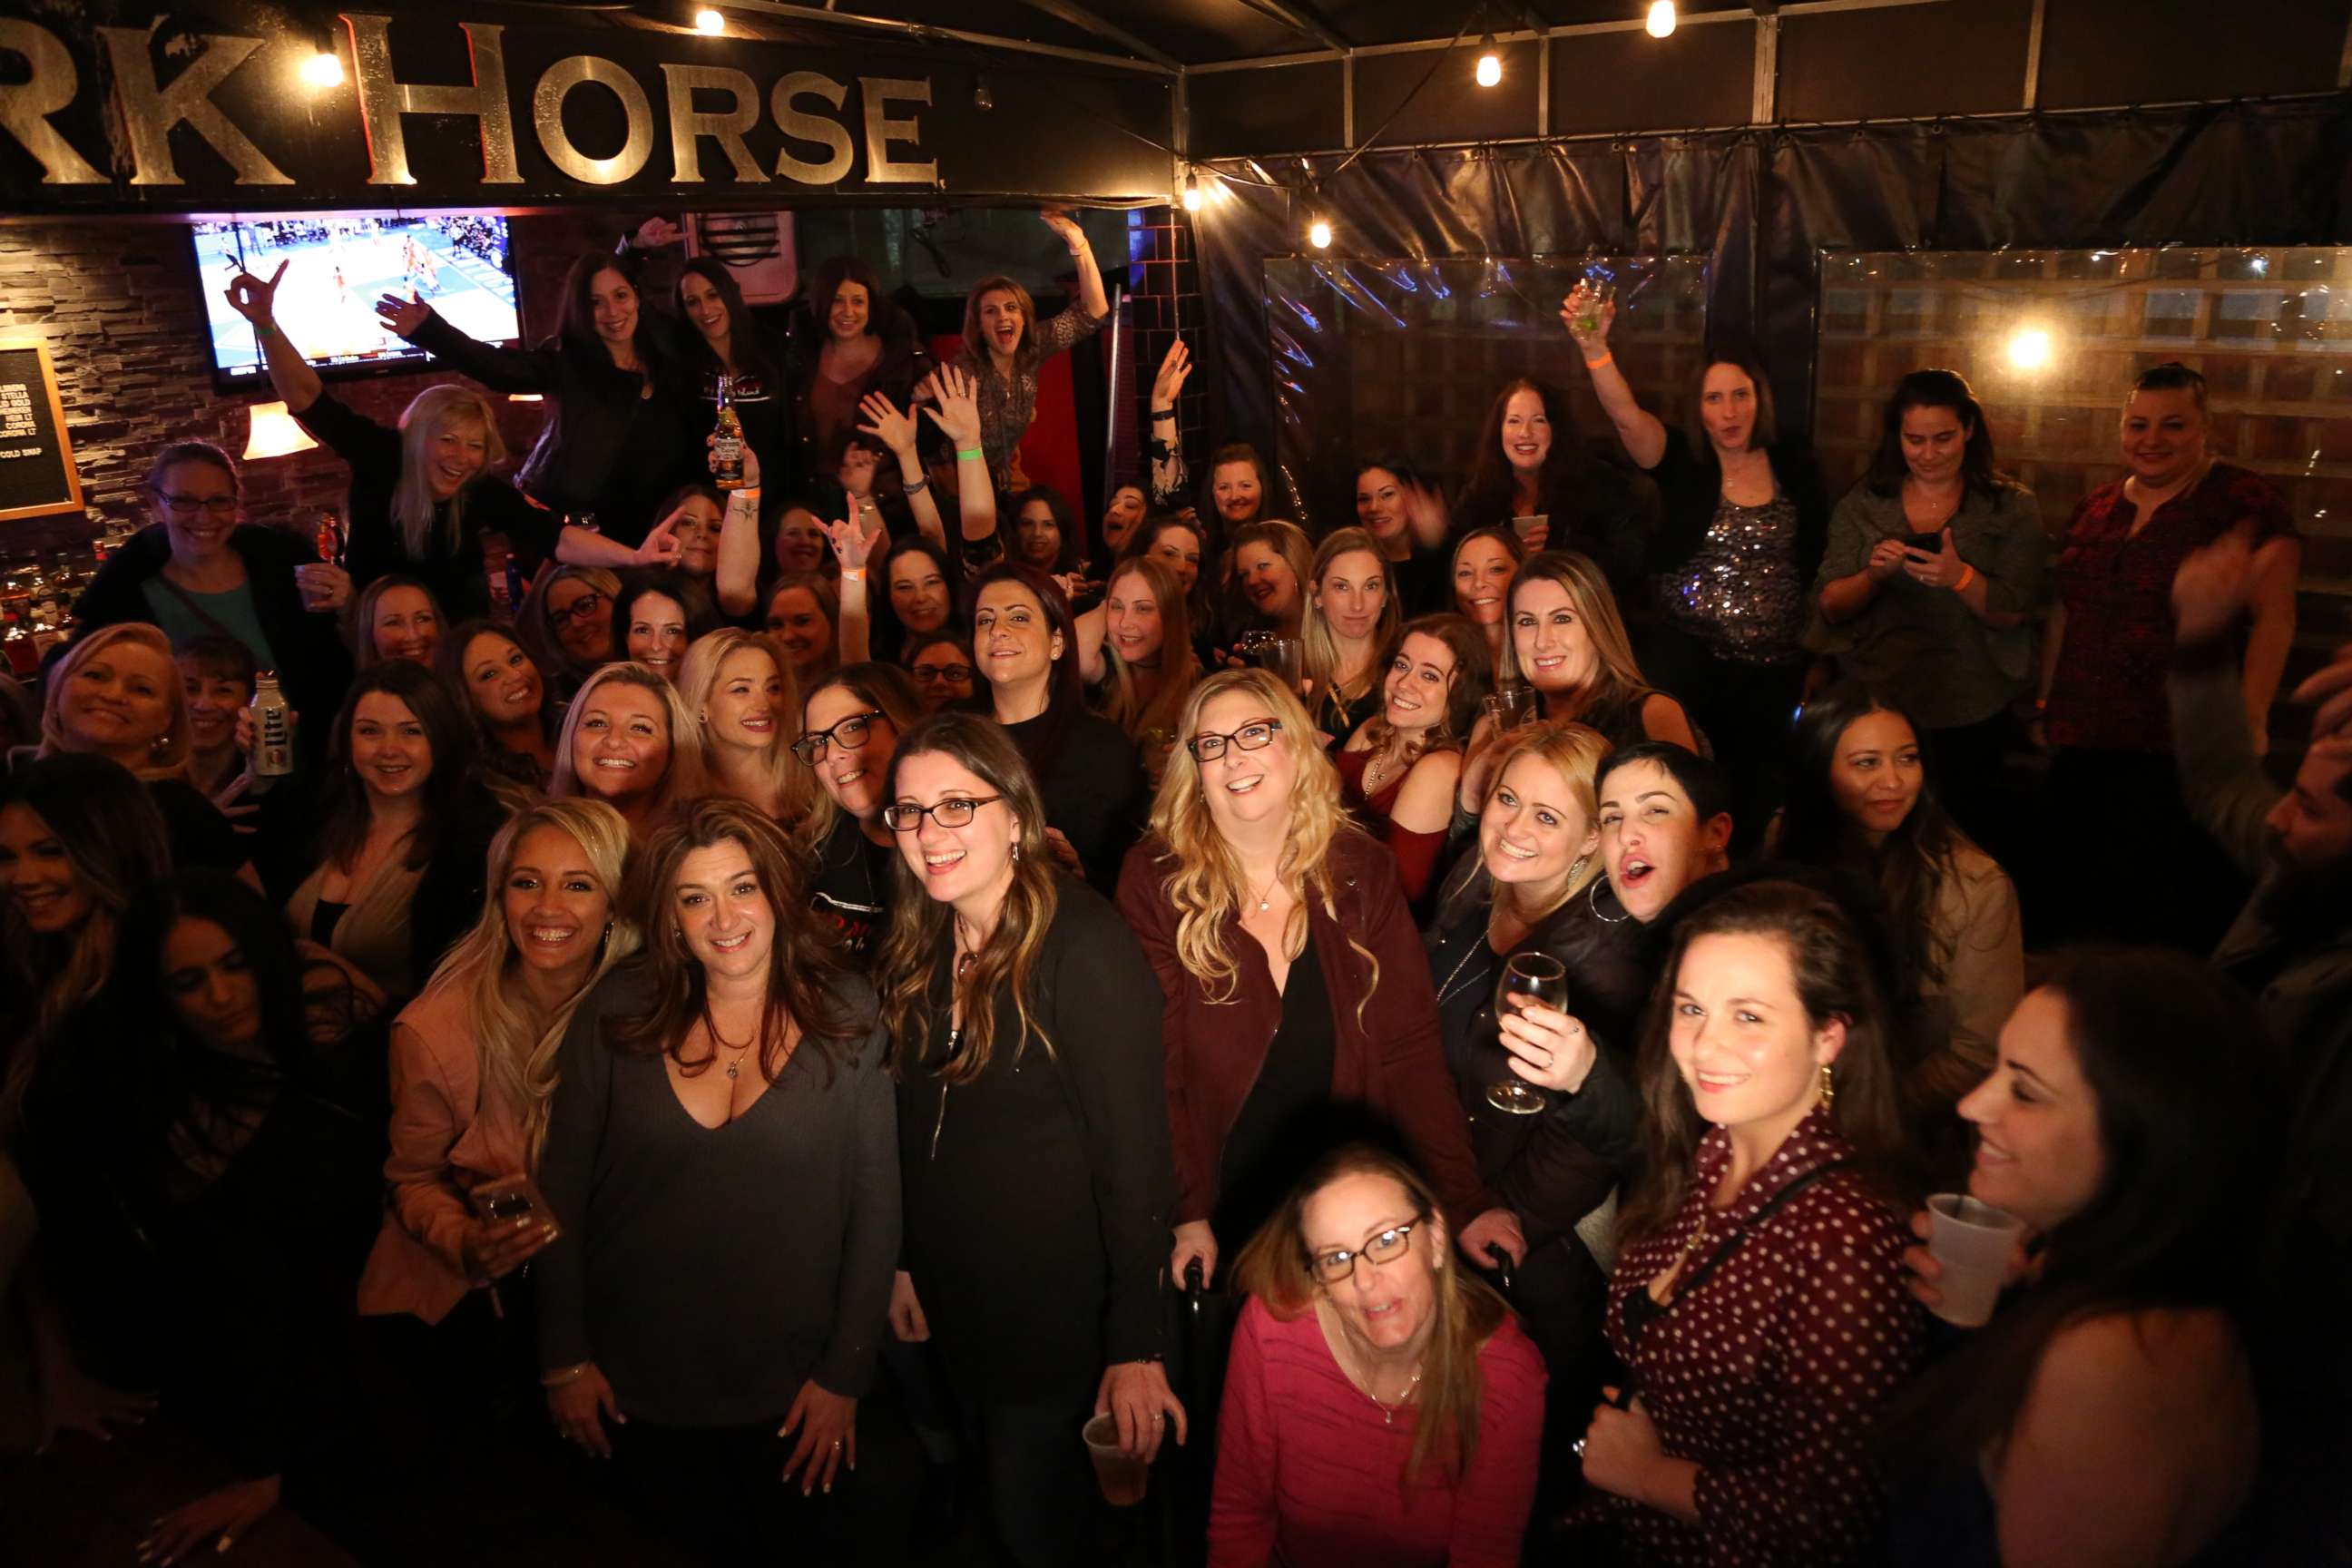 PHOTO: With 8,500 members, the "Bad Moms of Long Island" Facebook group is safe place where moms can joke, vent, support one another and have fun in the process.